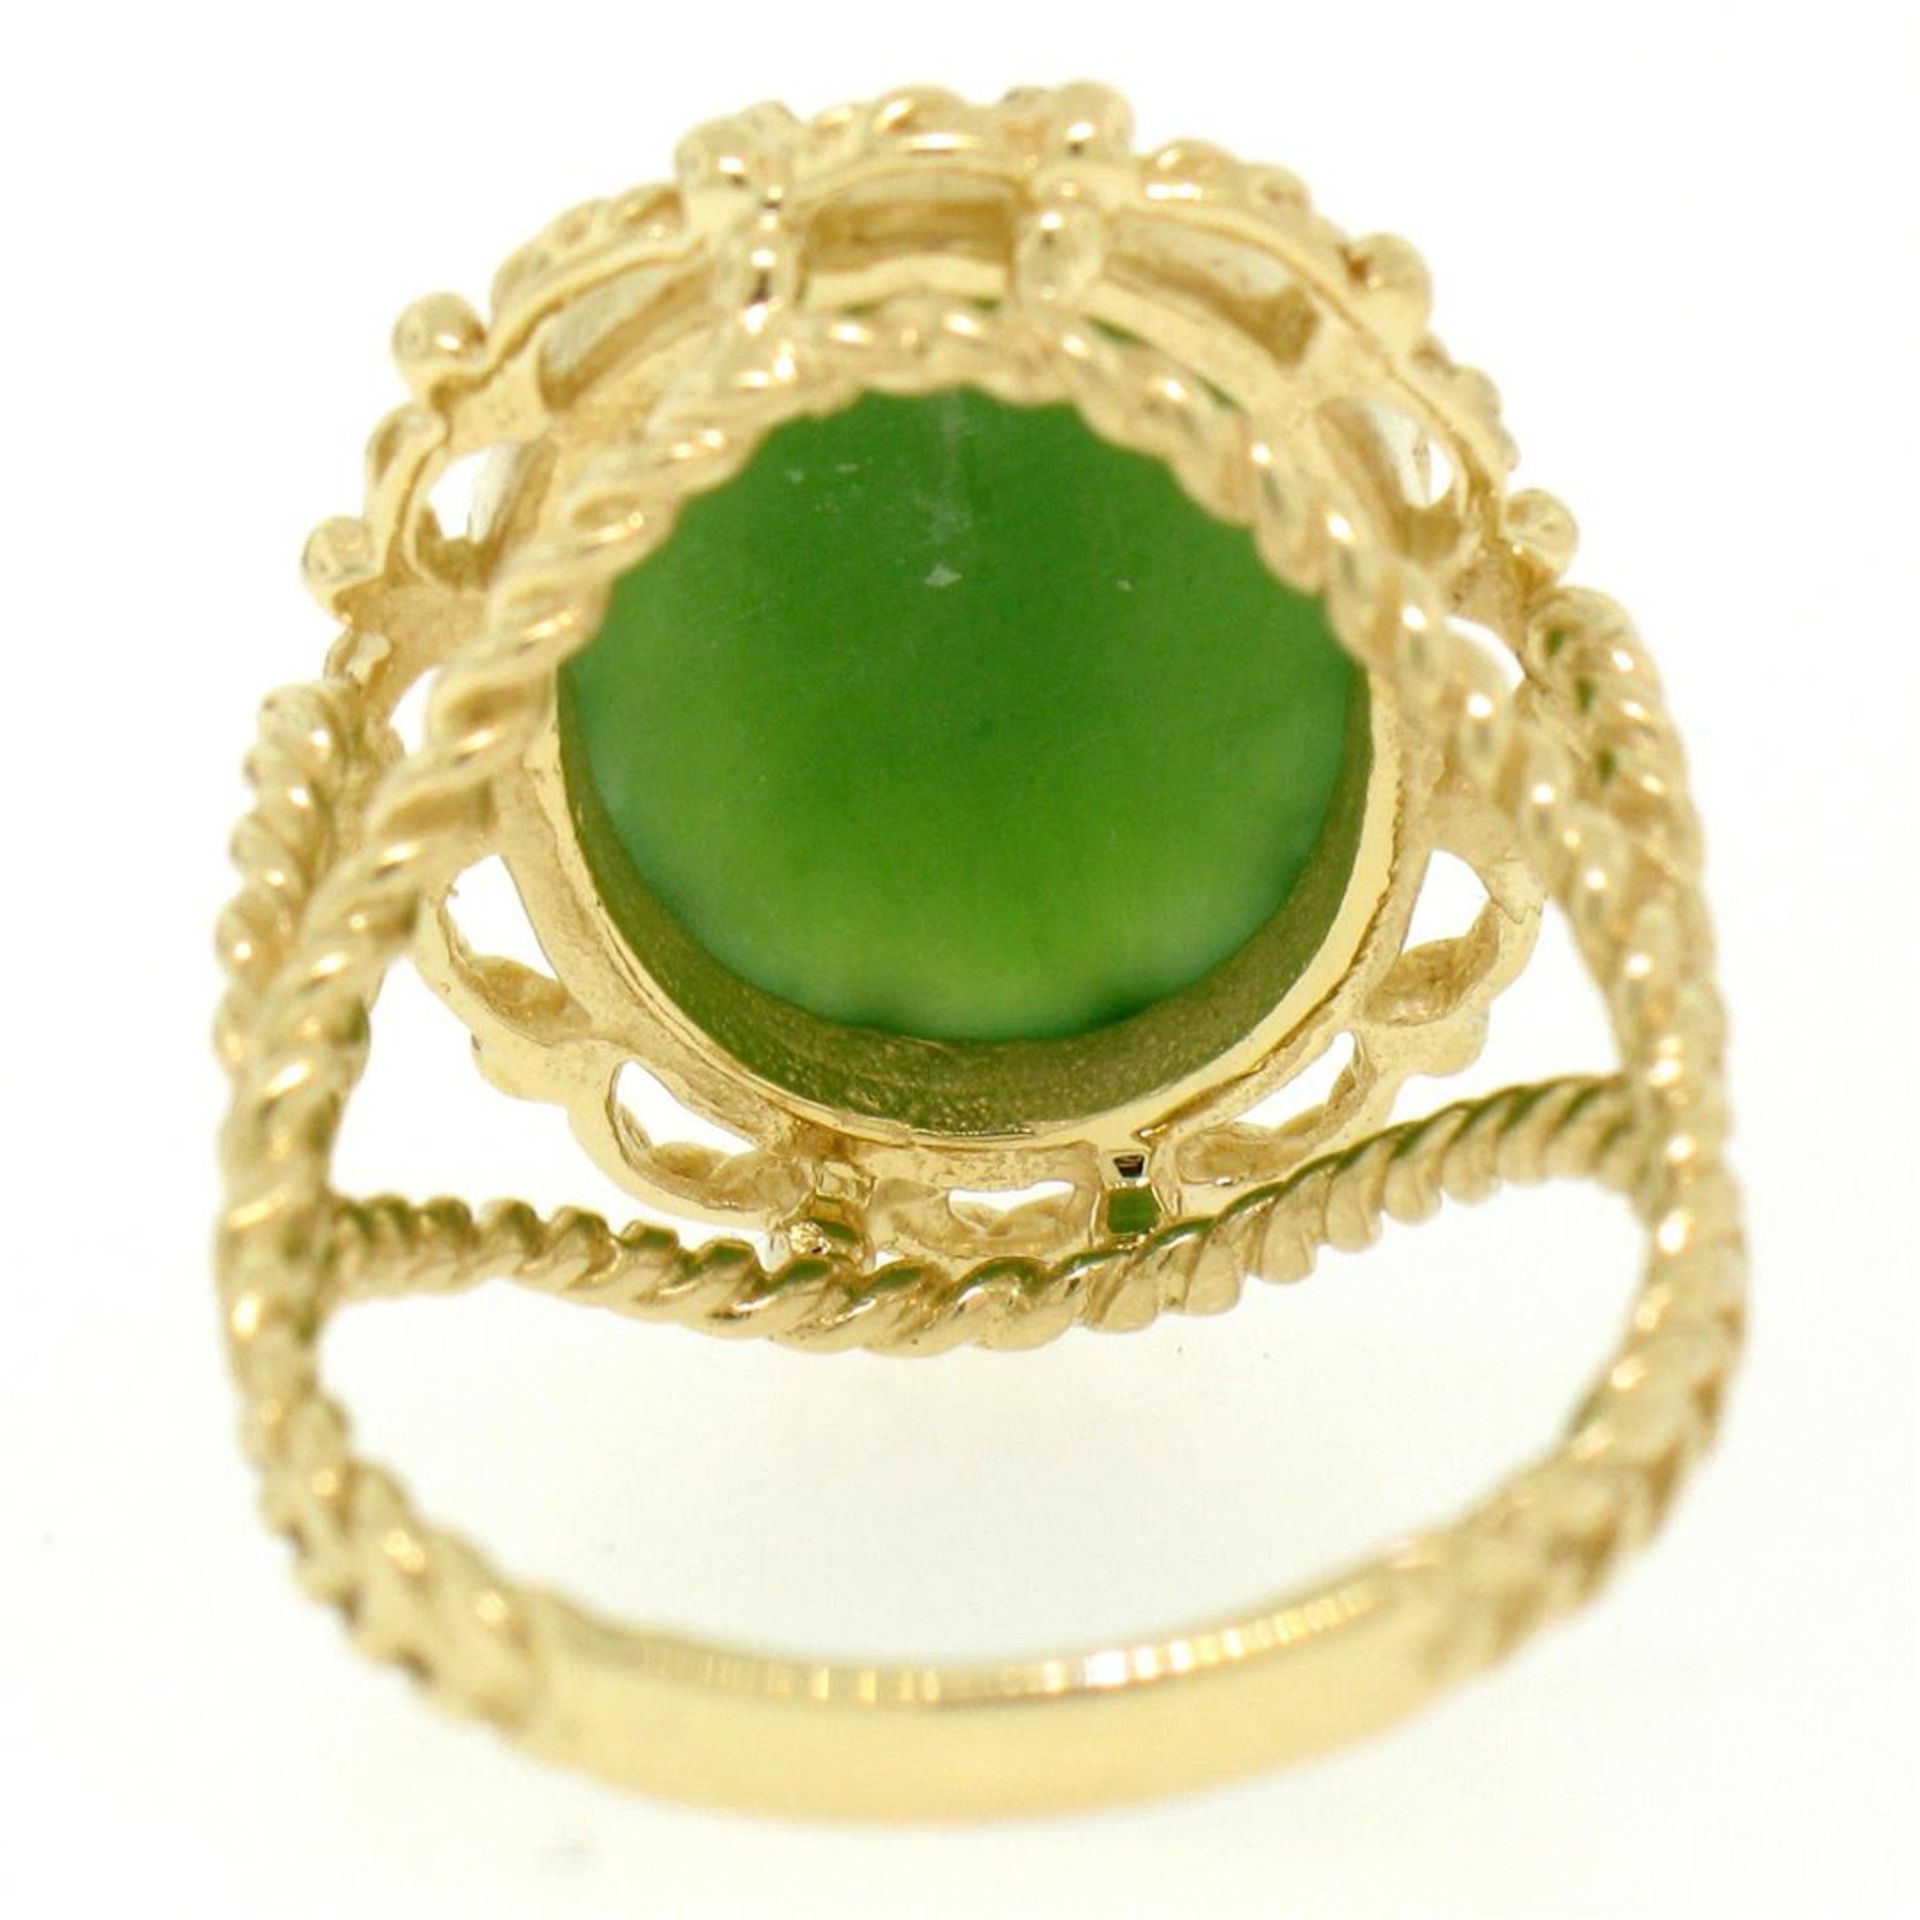 14k Yellow Gold Prong Set Cabochon Olive Green Nephrite Jade Twisted Wire Ring - Image 5 of 8